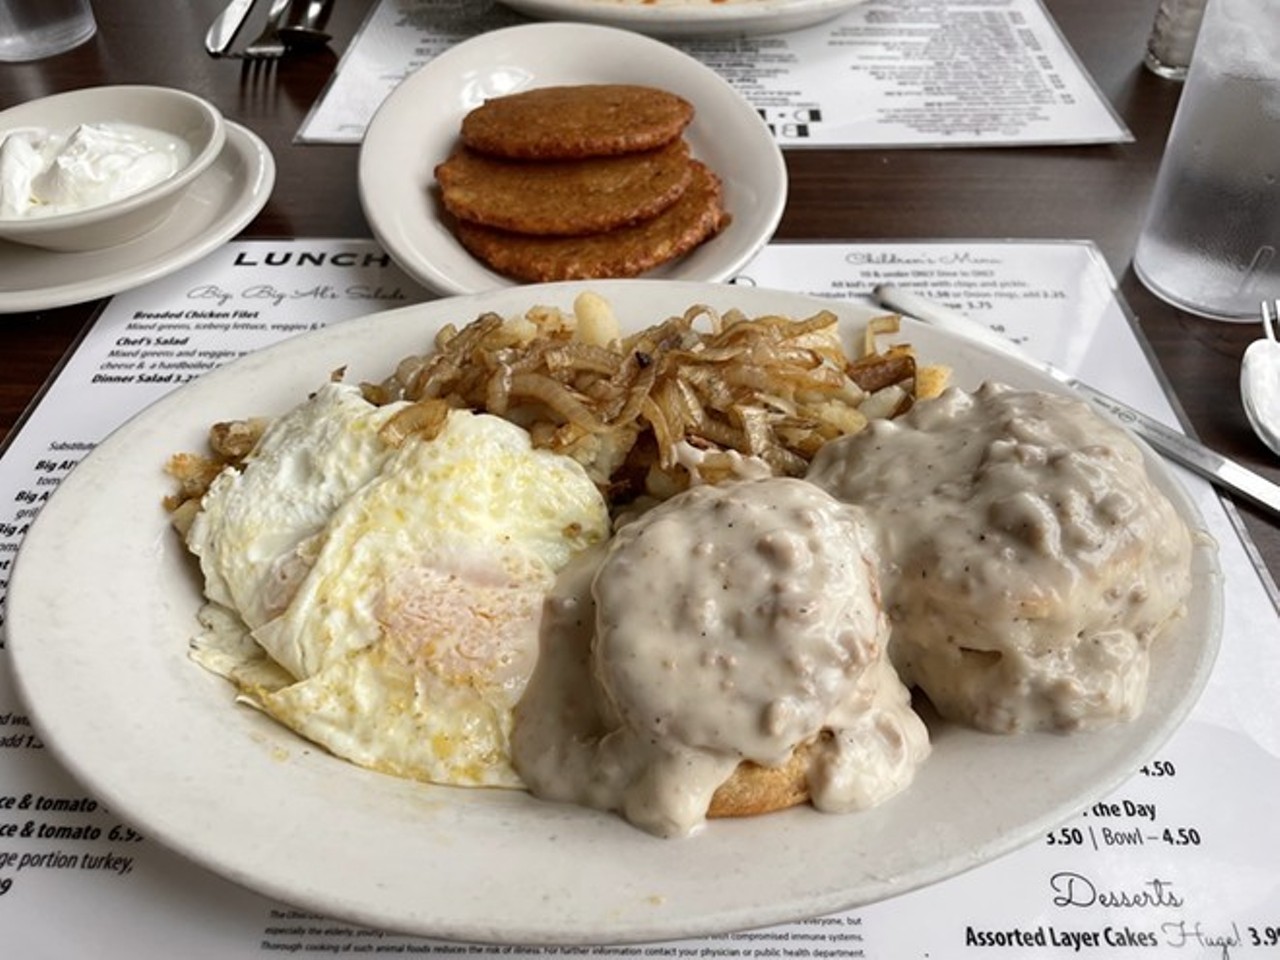 Big Al's Diner, Biscuits & Gravy
Doug’s tweeted, IG-ed and written more about Big Al’s Diner than most other places in town, and for good reason.
As he crowned the biscuits and gravy one of the best things he ate in the 2010s: “Mornings are for suckers, but there's one dish in town that makes breakfast bearable: the biscuits and gravy at Big Al's Diner. While everybody else in the room is naively tucking into plates of corned beef hash, discerning diners are slicing into runny eggs to spill that liquid sunshine onto sausage-gravy soaked biscuits. On the side is a hill of onion-spiked hash browns.”